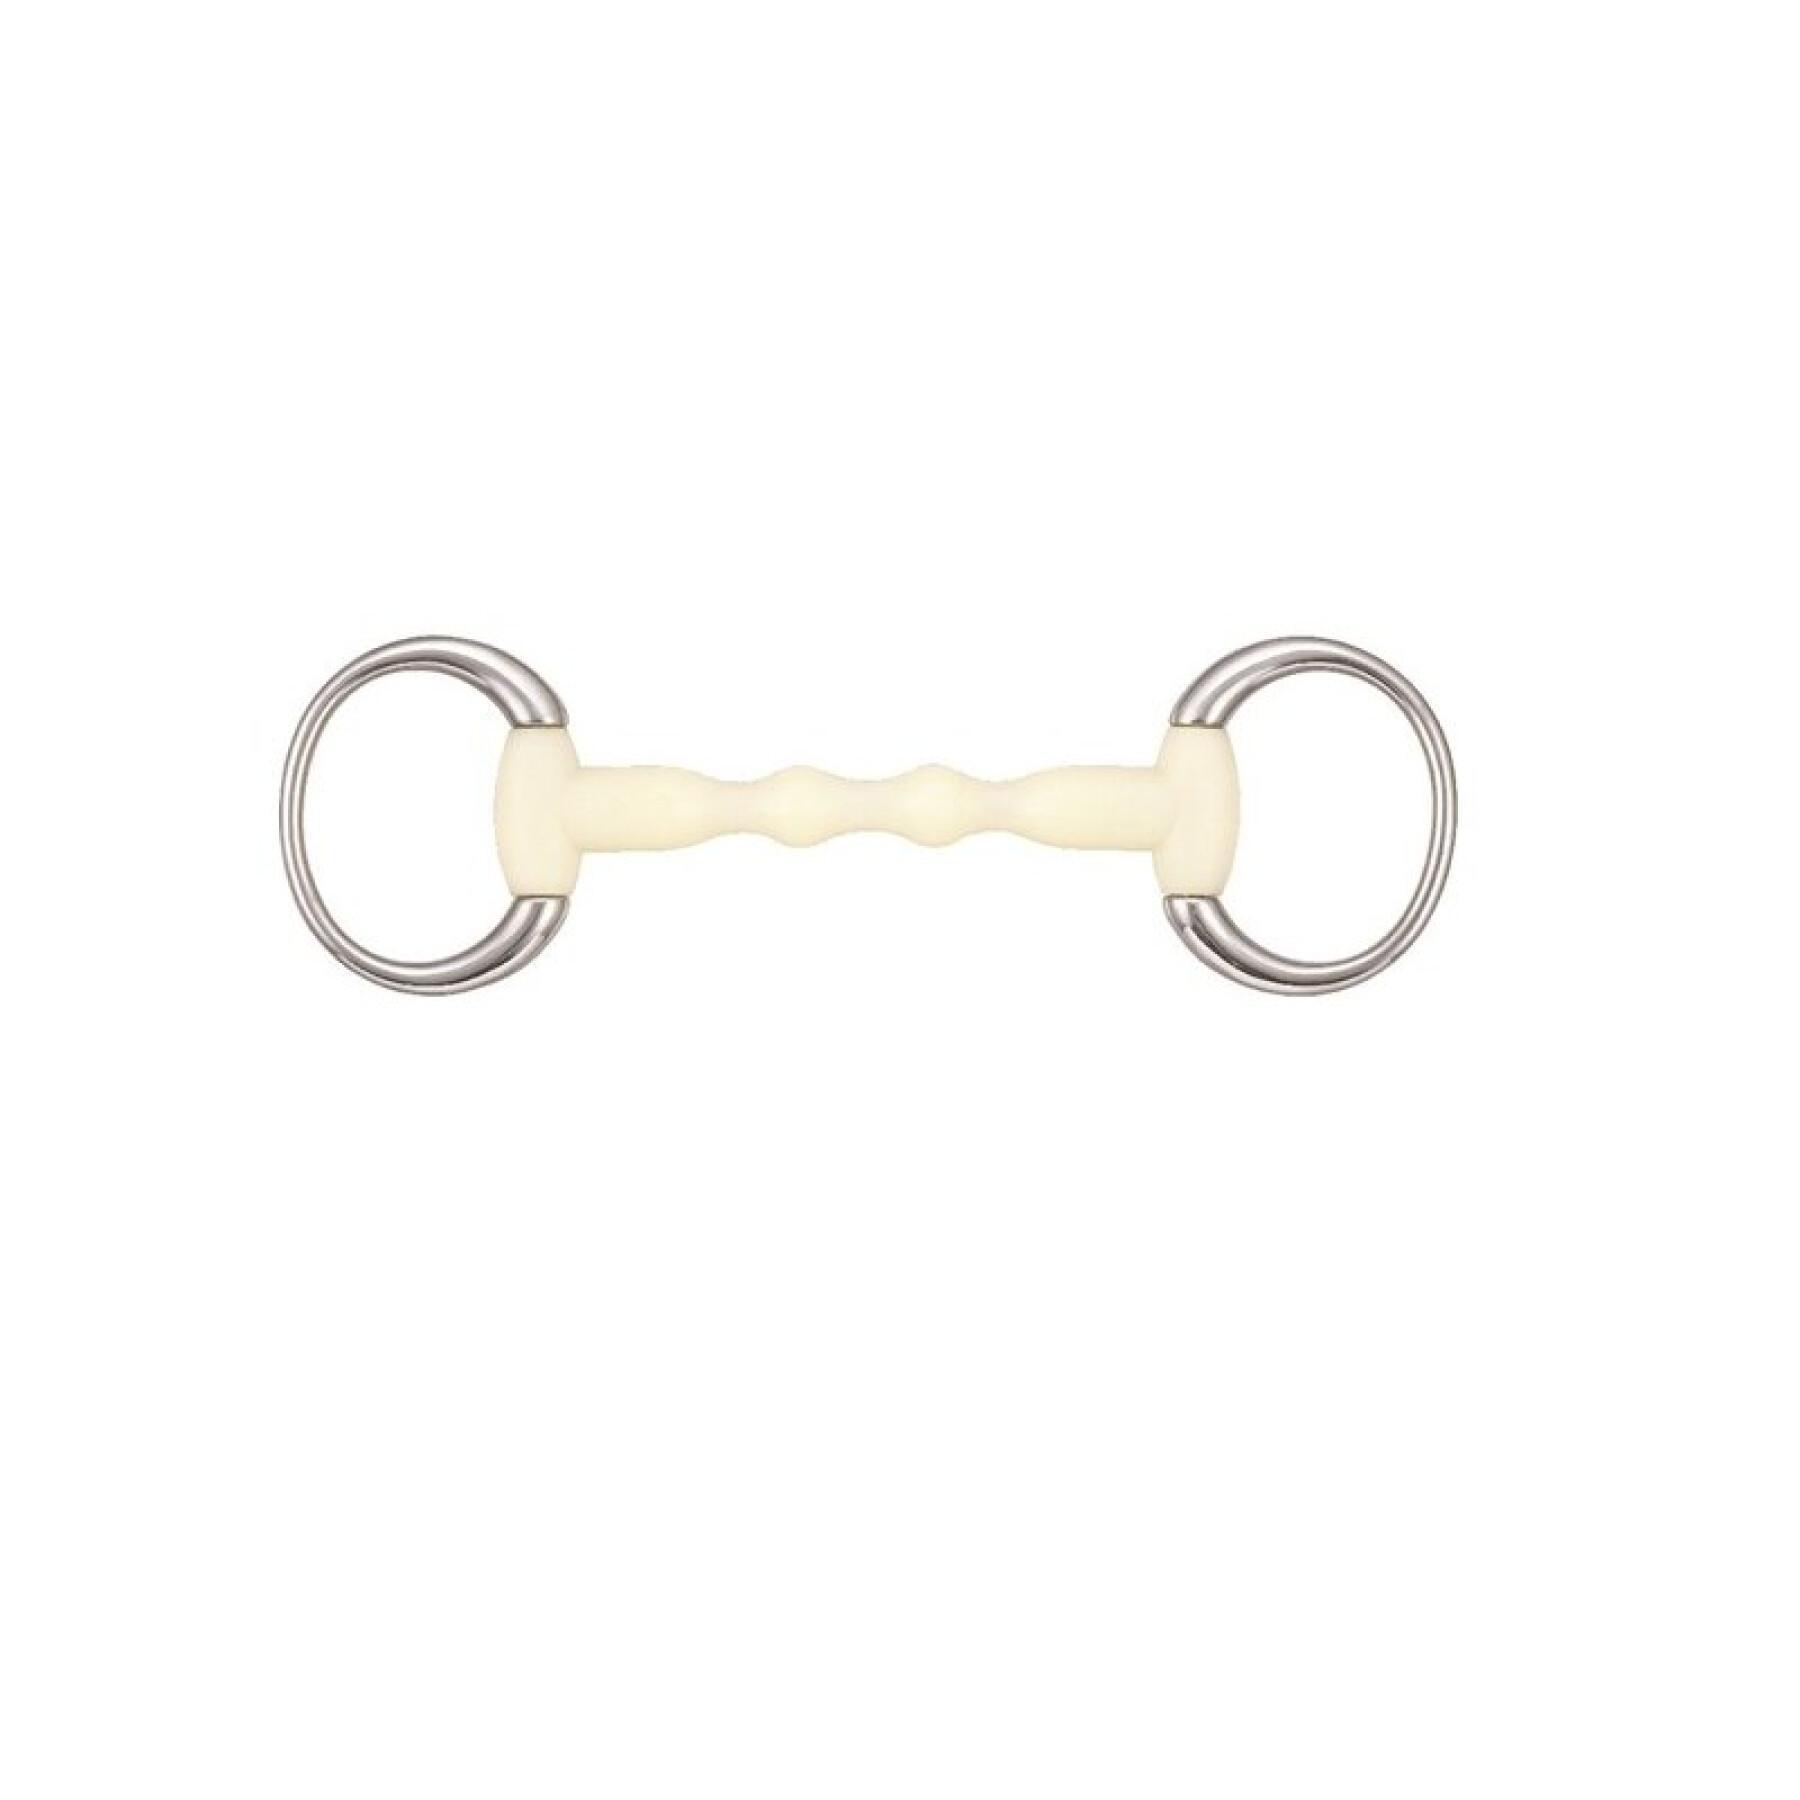 Mors olive pour cheval droit Soyo Happy mouth "mullen" round ring